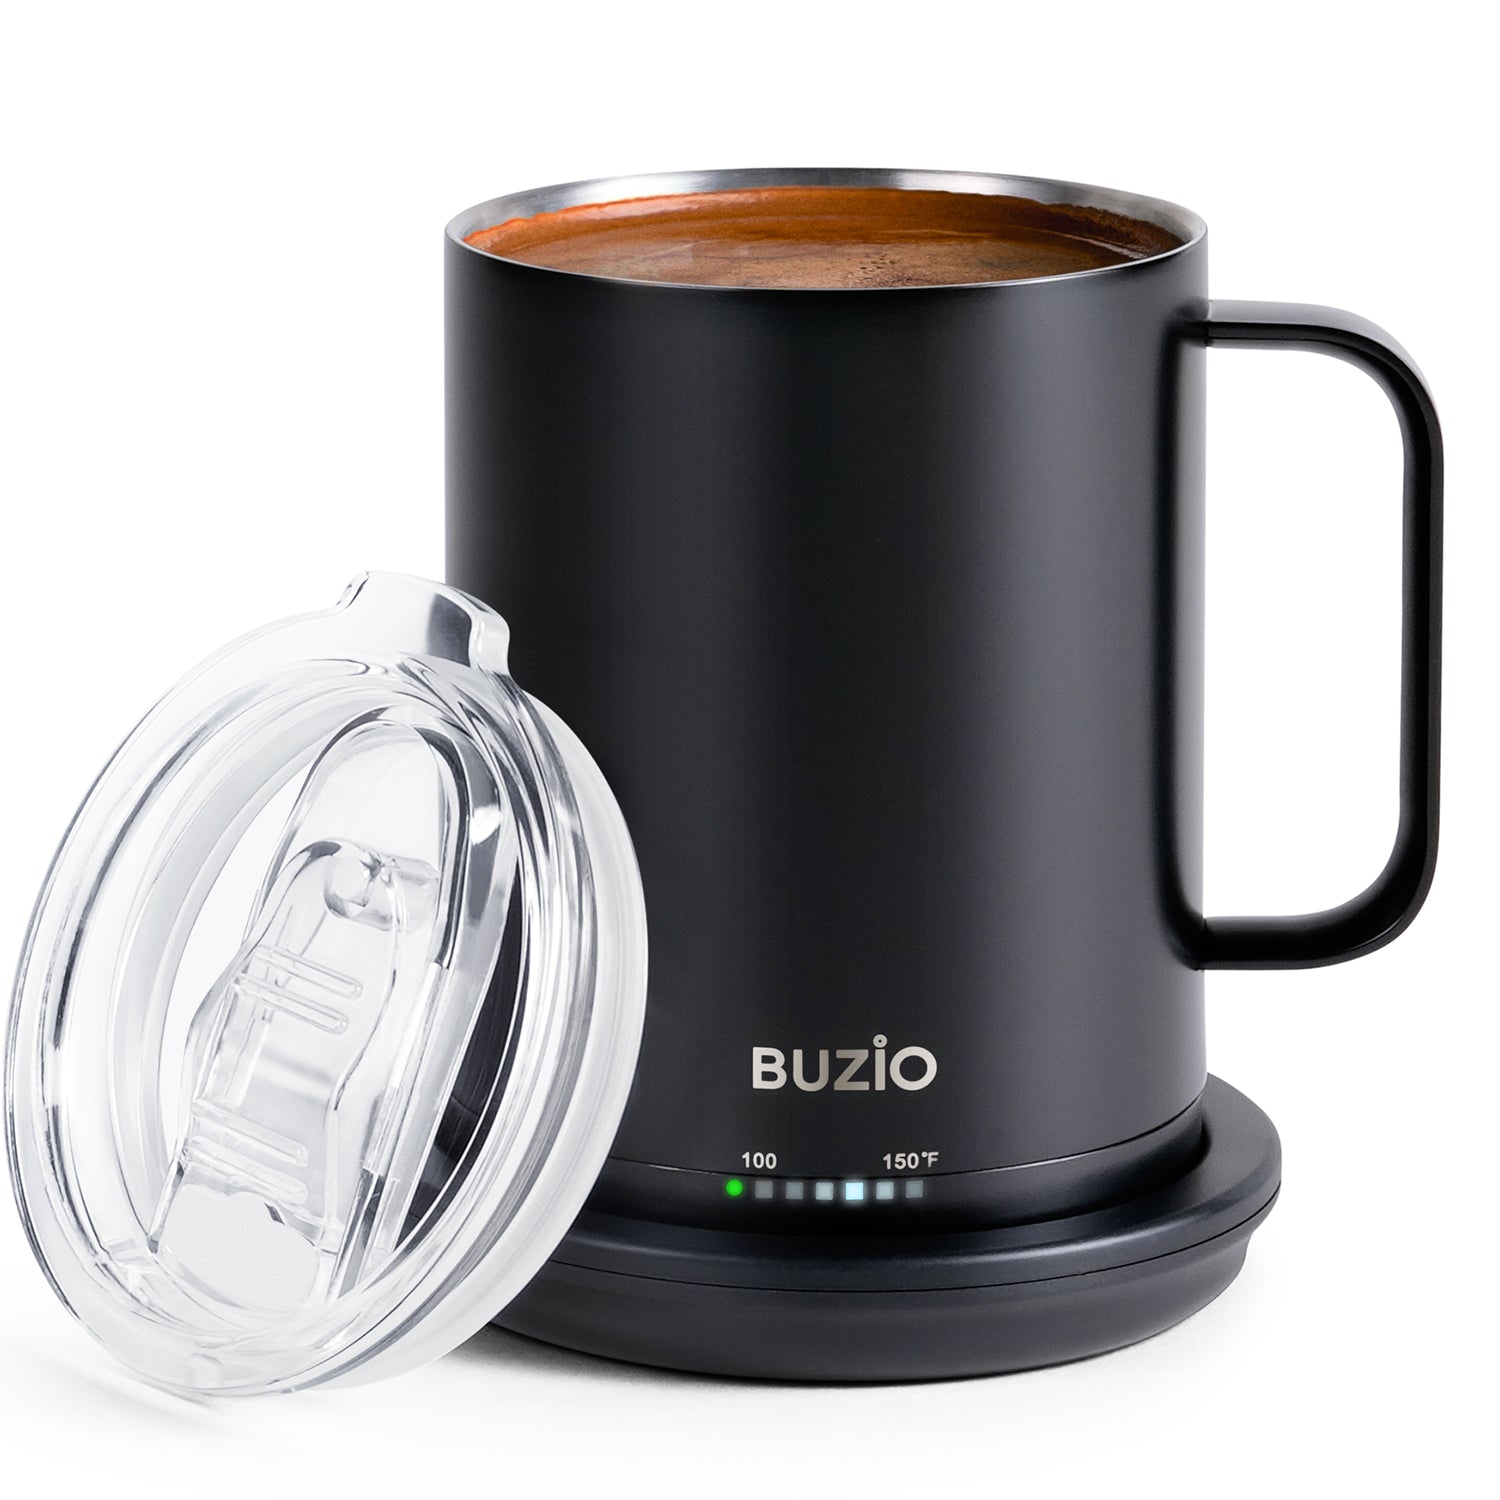 Electric Smart Mug Warmer Will Ensure That Your Beverage Is At The  Temperature You Want It To Be - Avail Offer Now